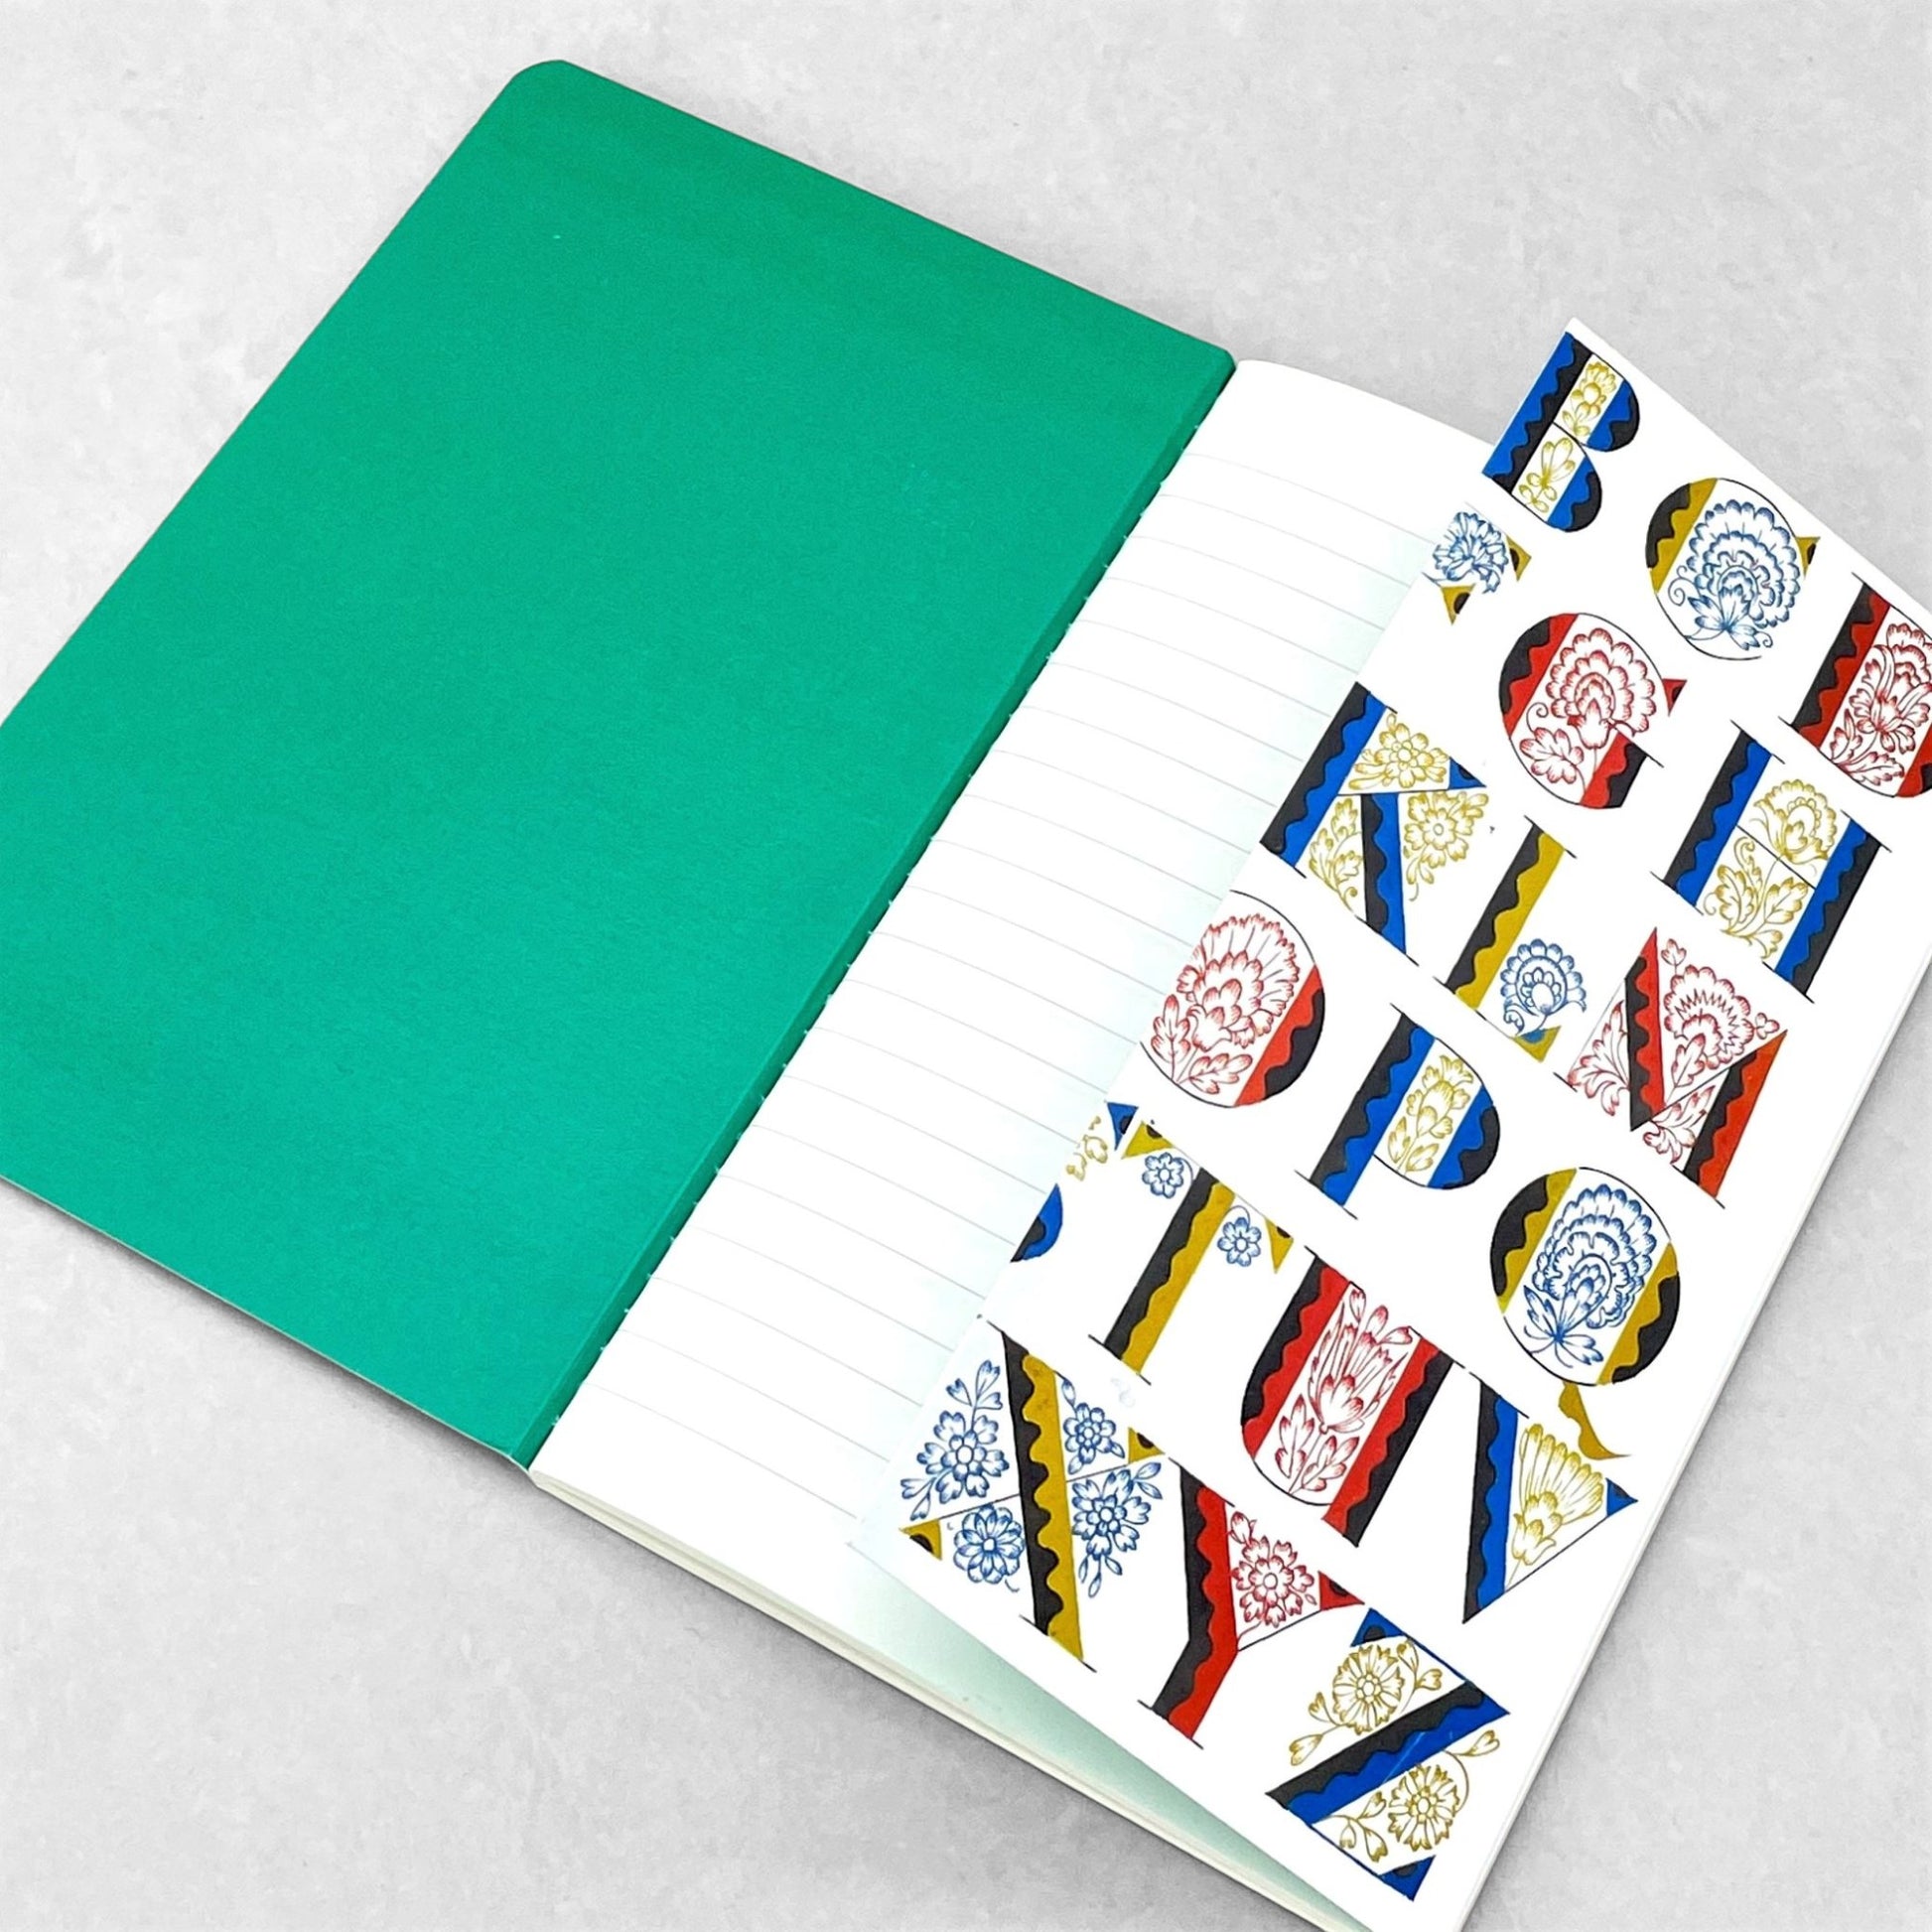 Small stitched notebook with a colourful alphabet cover design in red, blue and yellow on white background